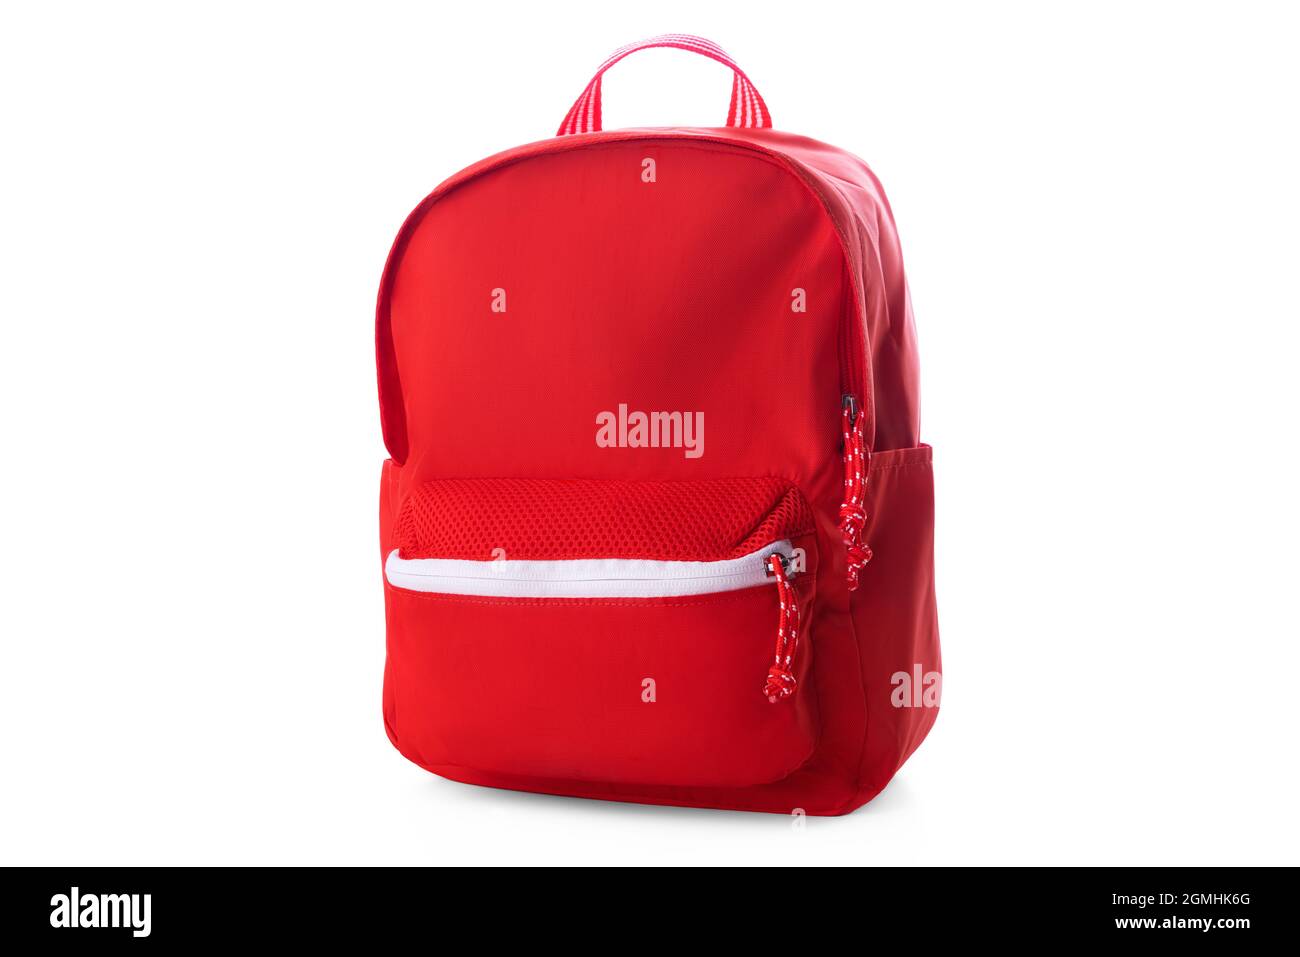 Red school backpack isolated on white Stock Photo